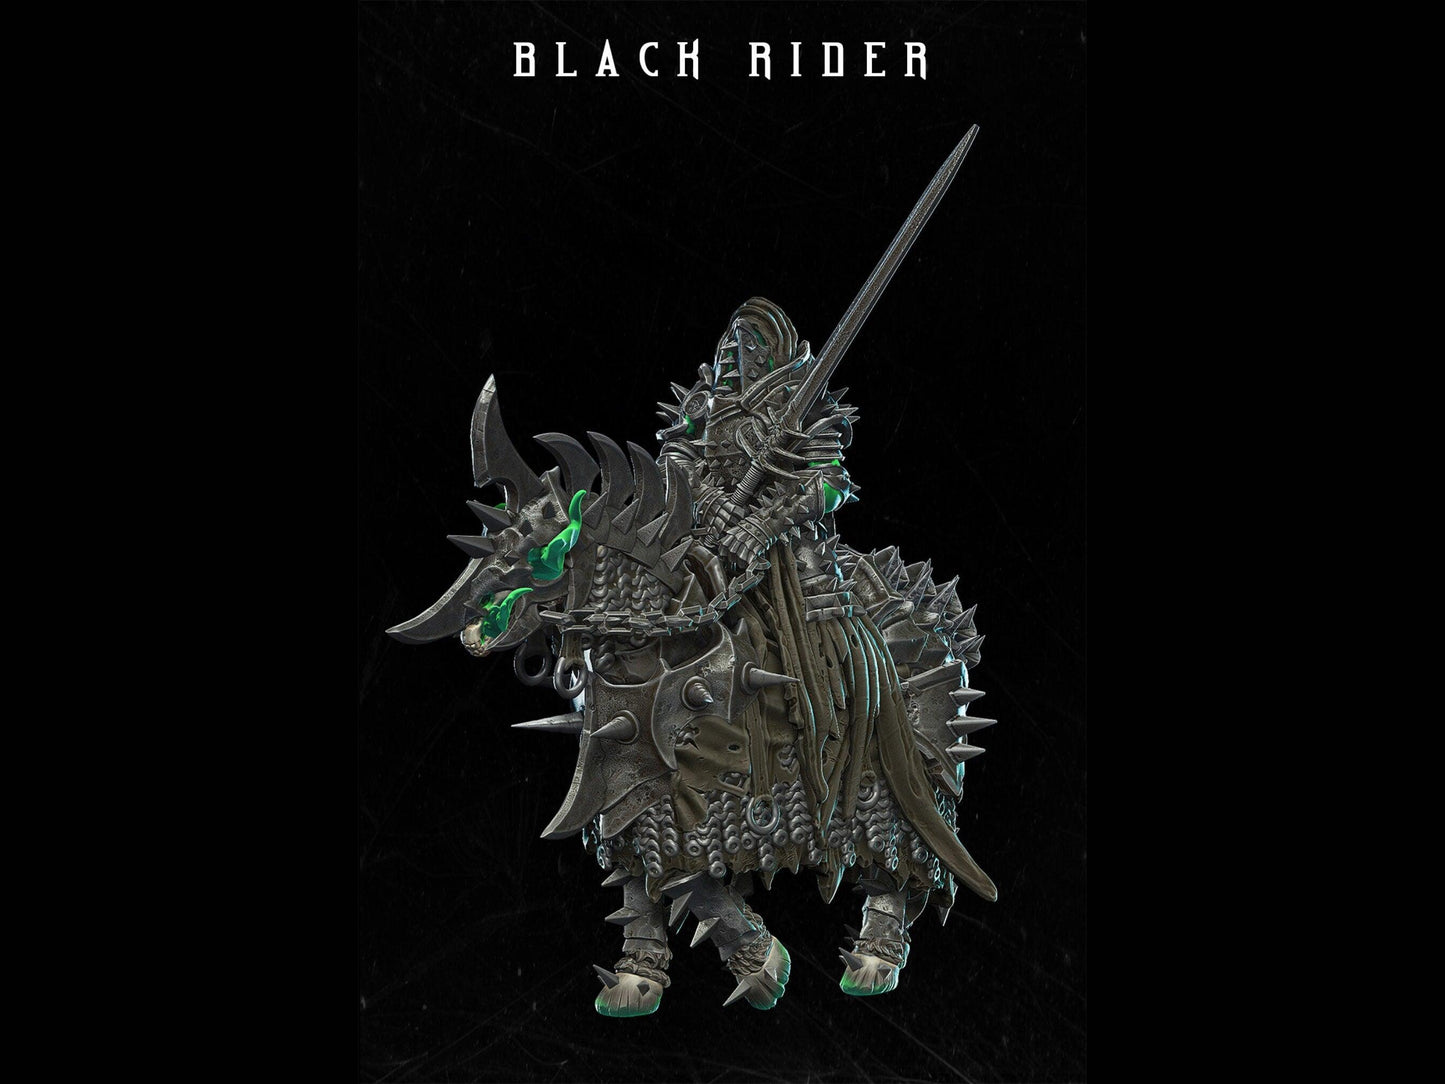 Black Rider miniature ghost miniature skeleton miniature 28mm scale Tabletop gaming DnD Miniature Dungeons and Dragons,dnd 5e - Plague Miniatures shop for DnD Miniatures